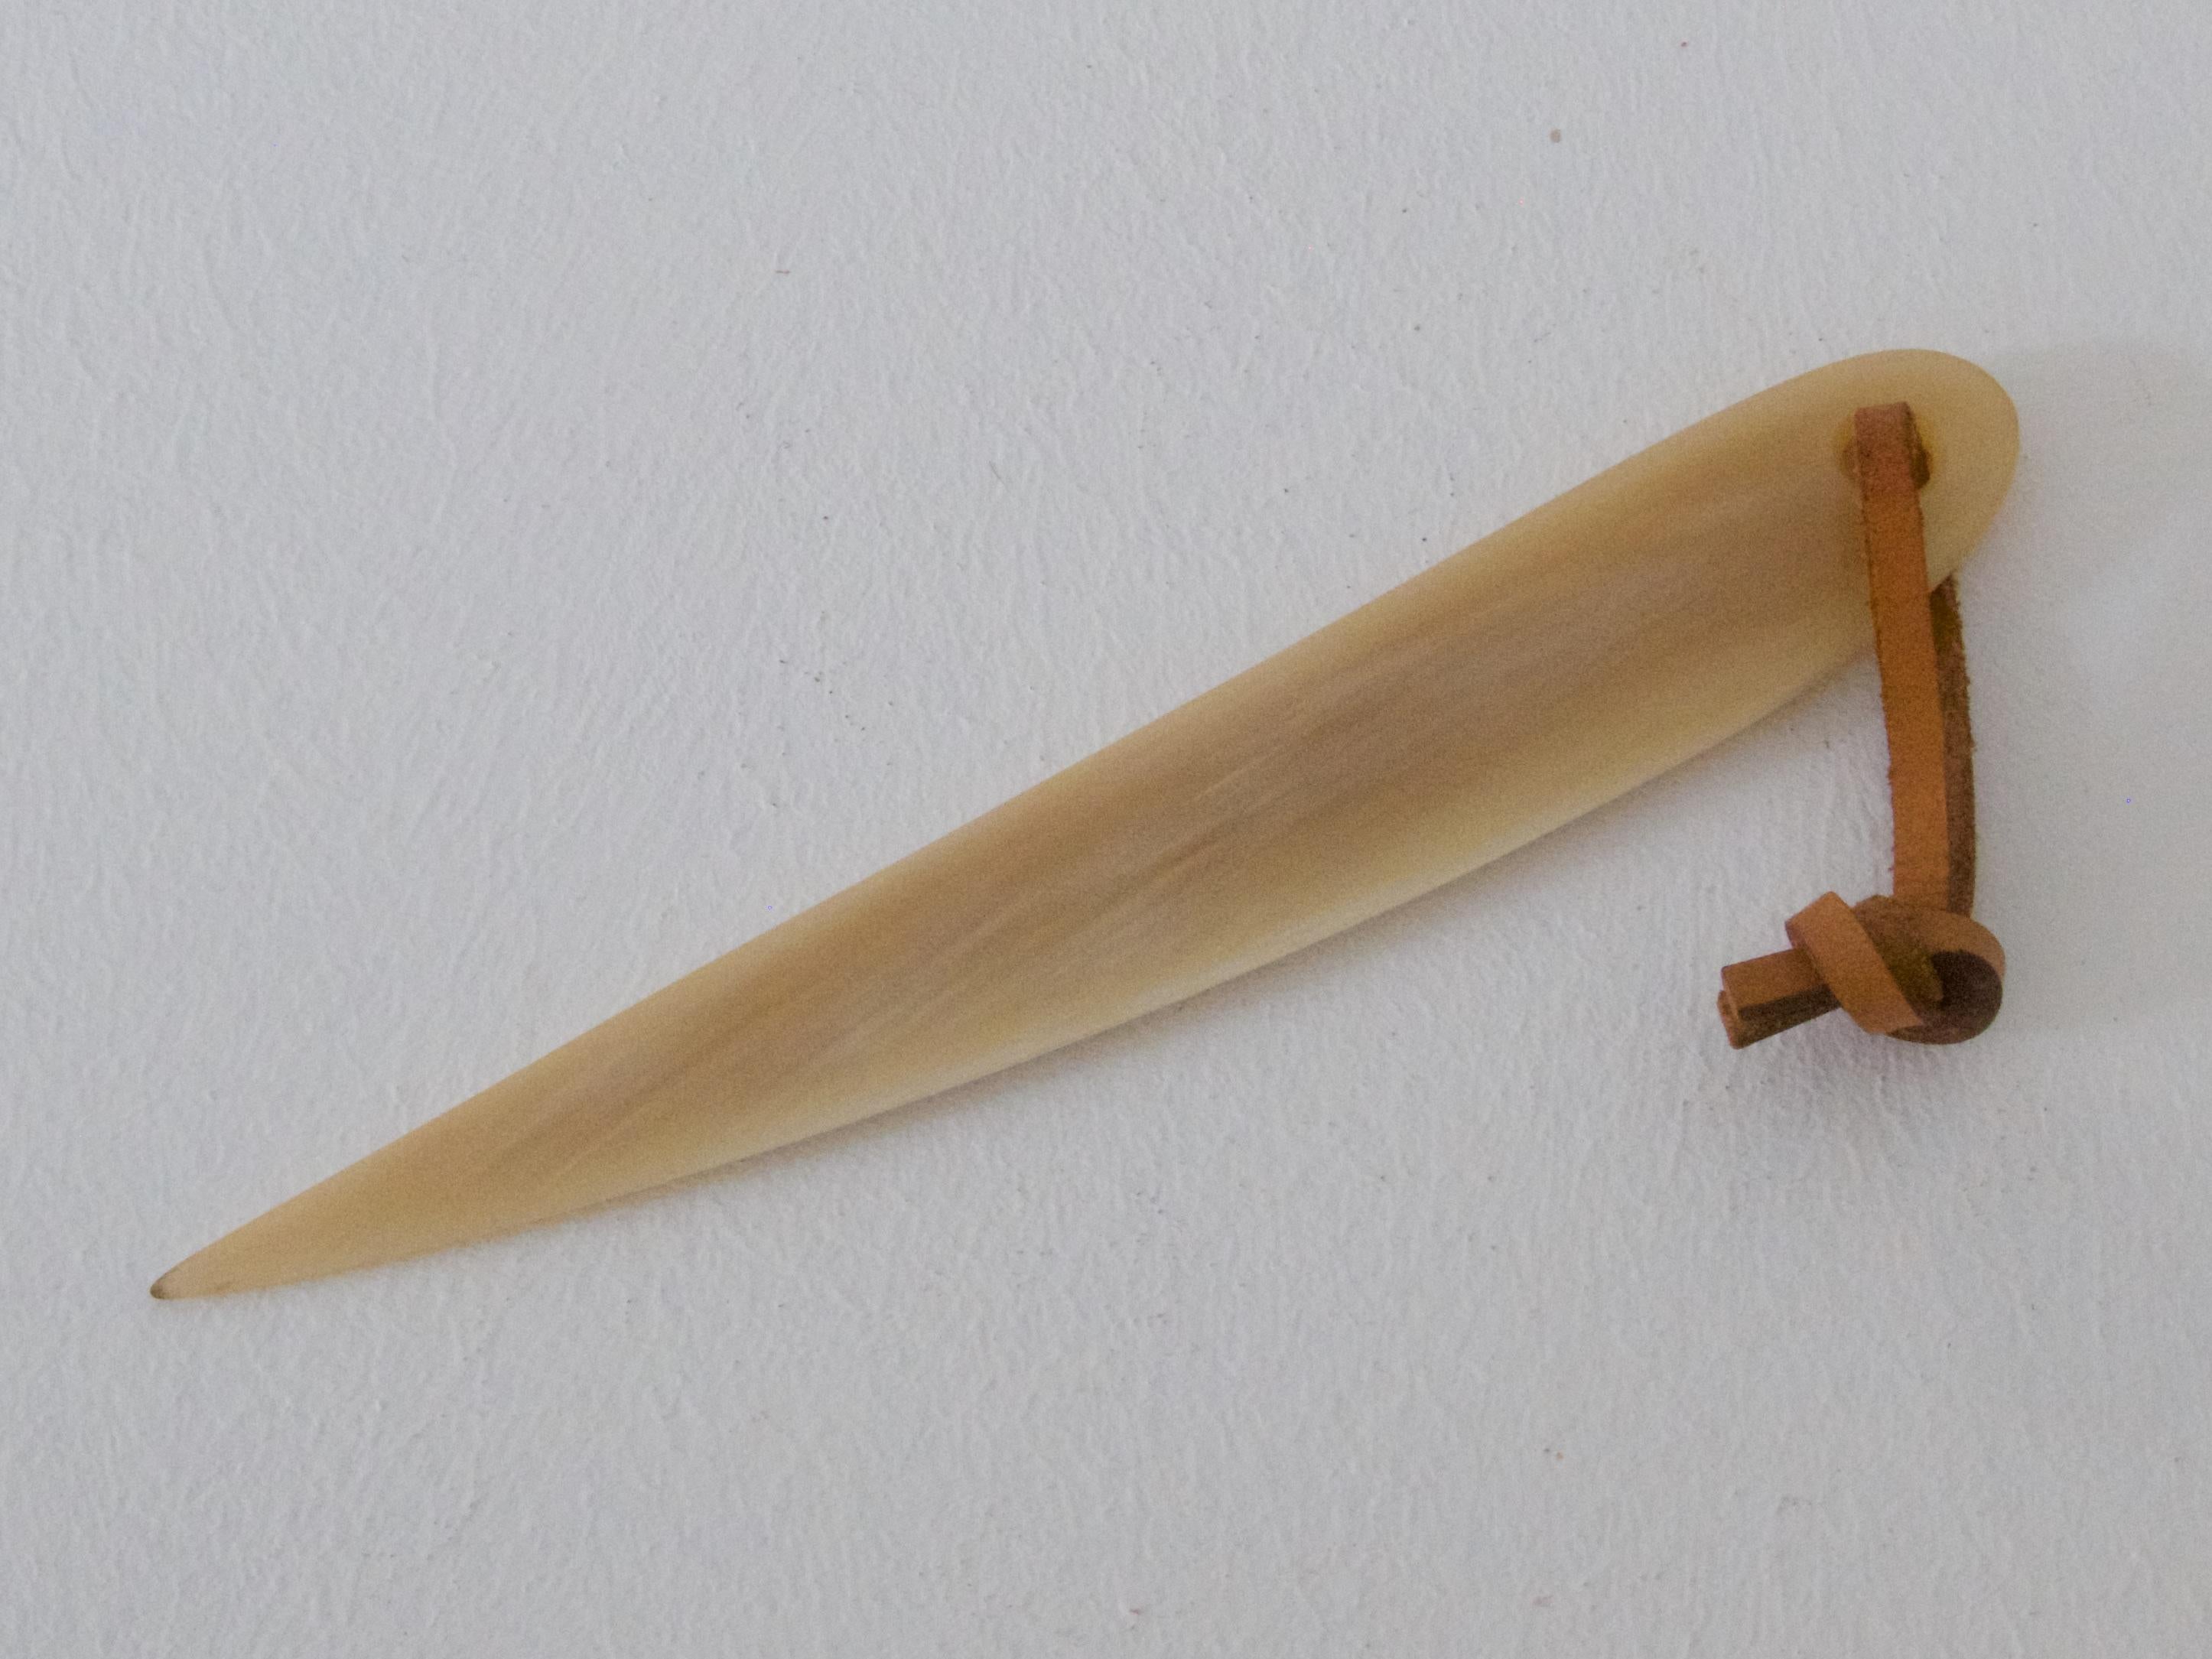 Beautiful letter opener / paper knife, no. 4727
Designed circa 1950 by Carl Auböck.

Horn with leather strap

Length of the knife: 21.5 cm, 8.46 inches.

Very good condition!

Lit.: die kataloge der werkstätte Carl Auböck 1925-1975, ISBN